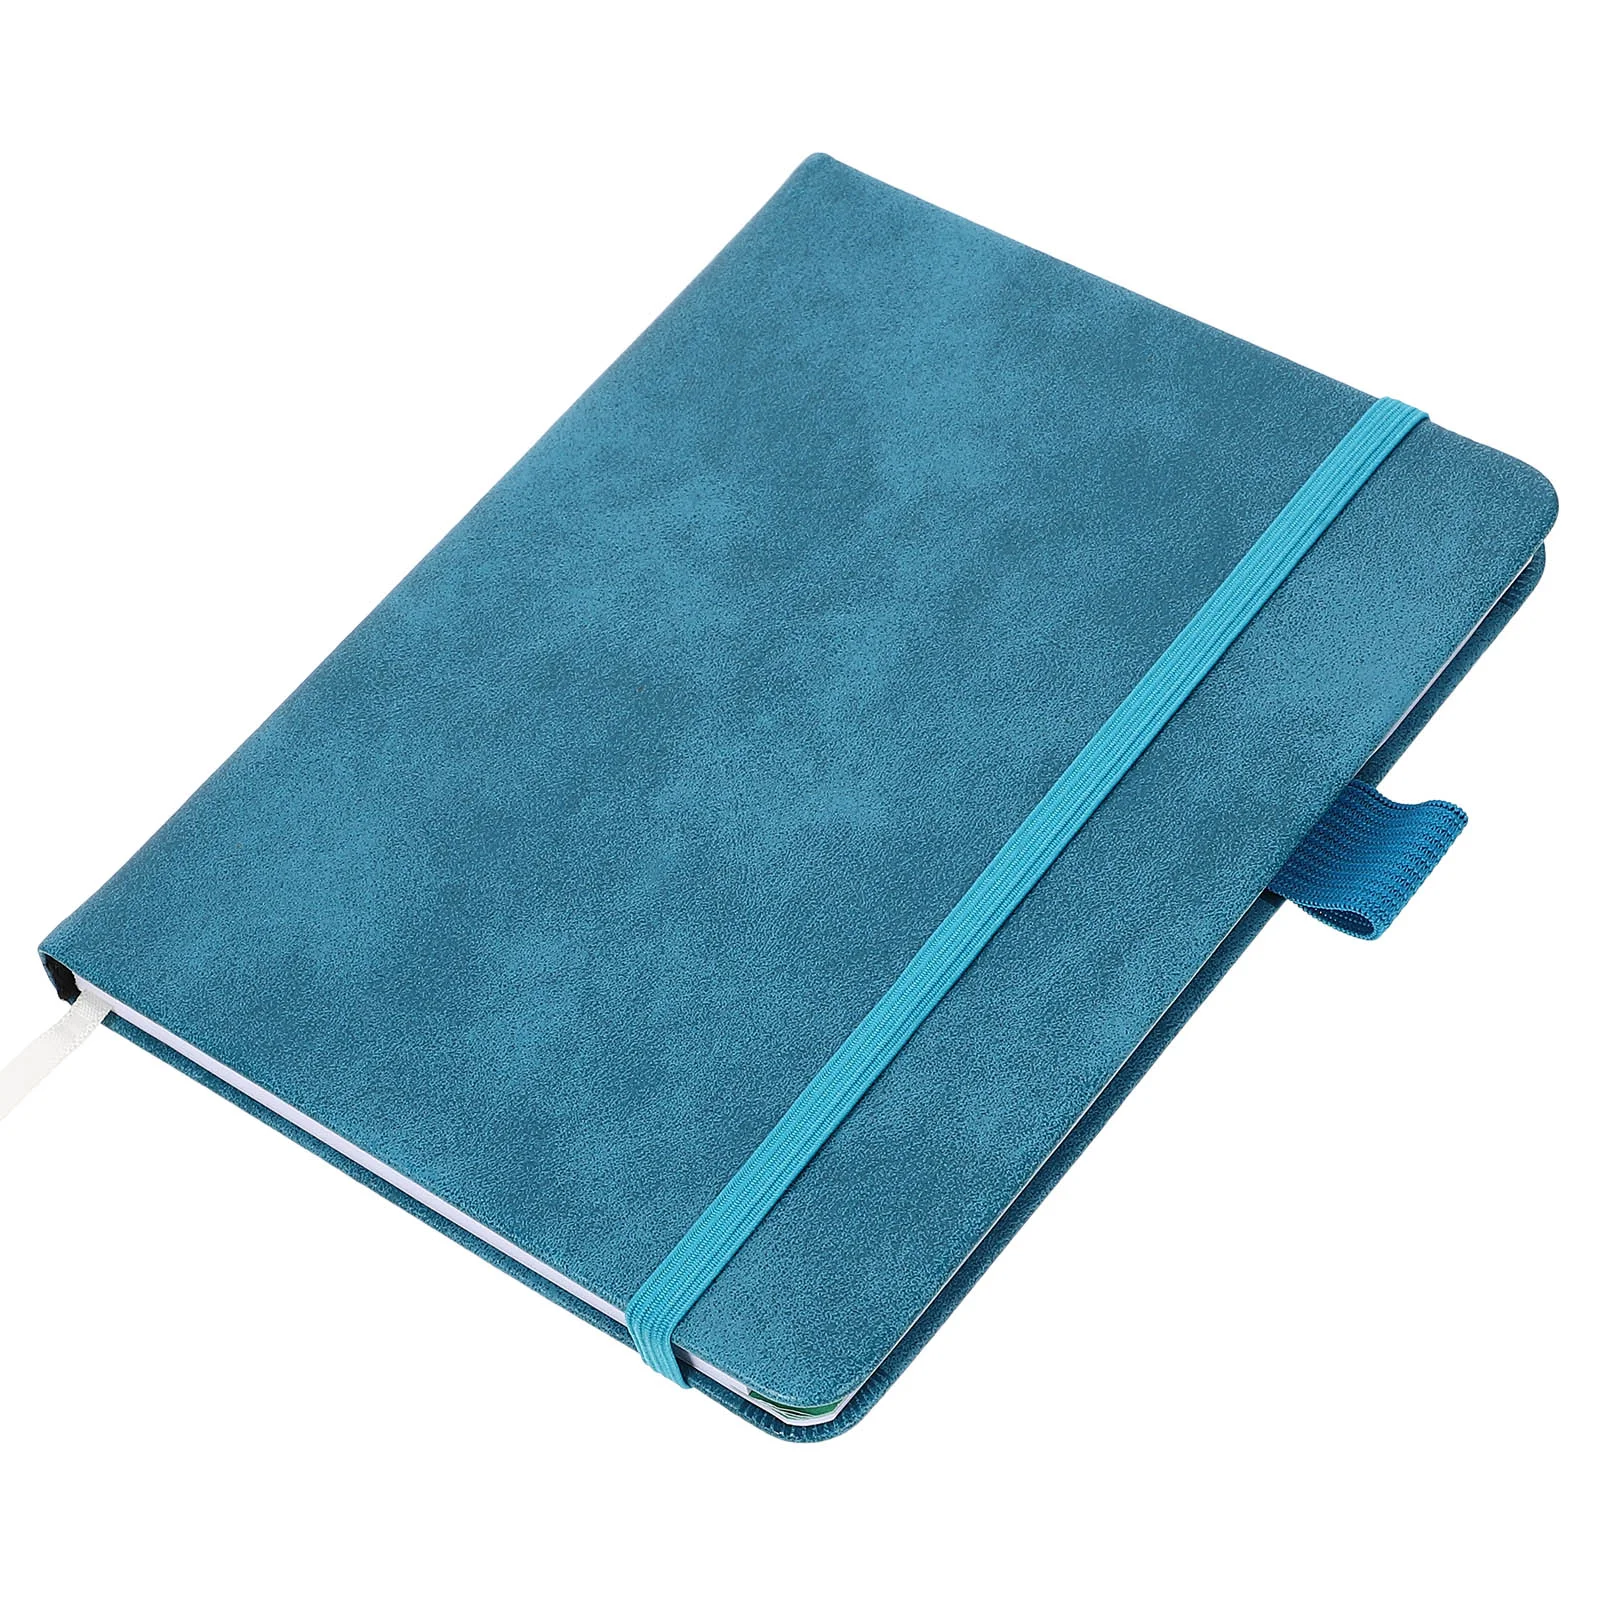 

Password Book Address Phone Imitation Index Page with Pen Insert Strap (sky Blue ) Mini Contact for Numbers Telephone